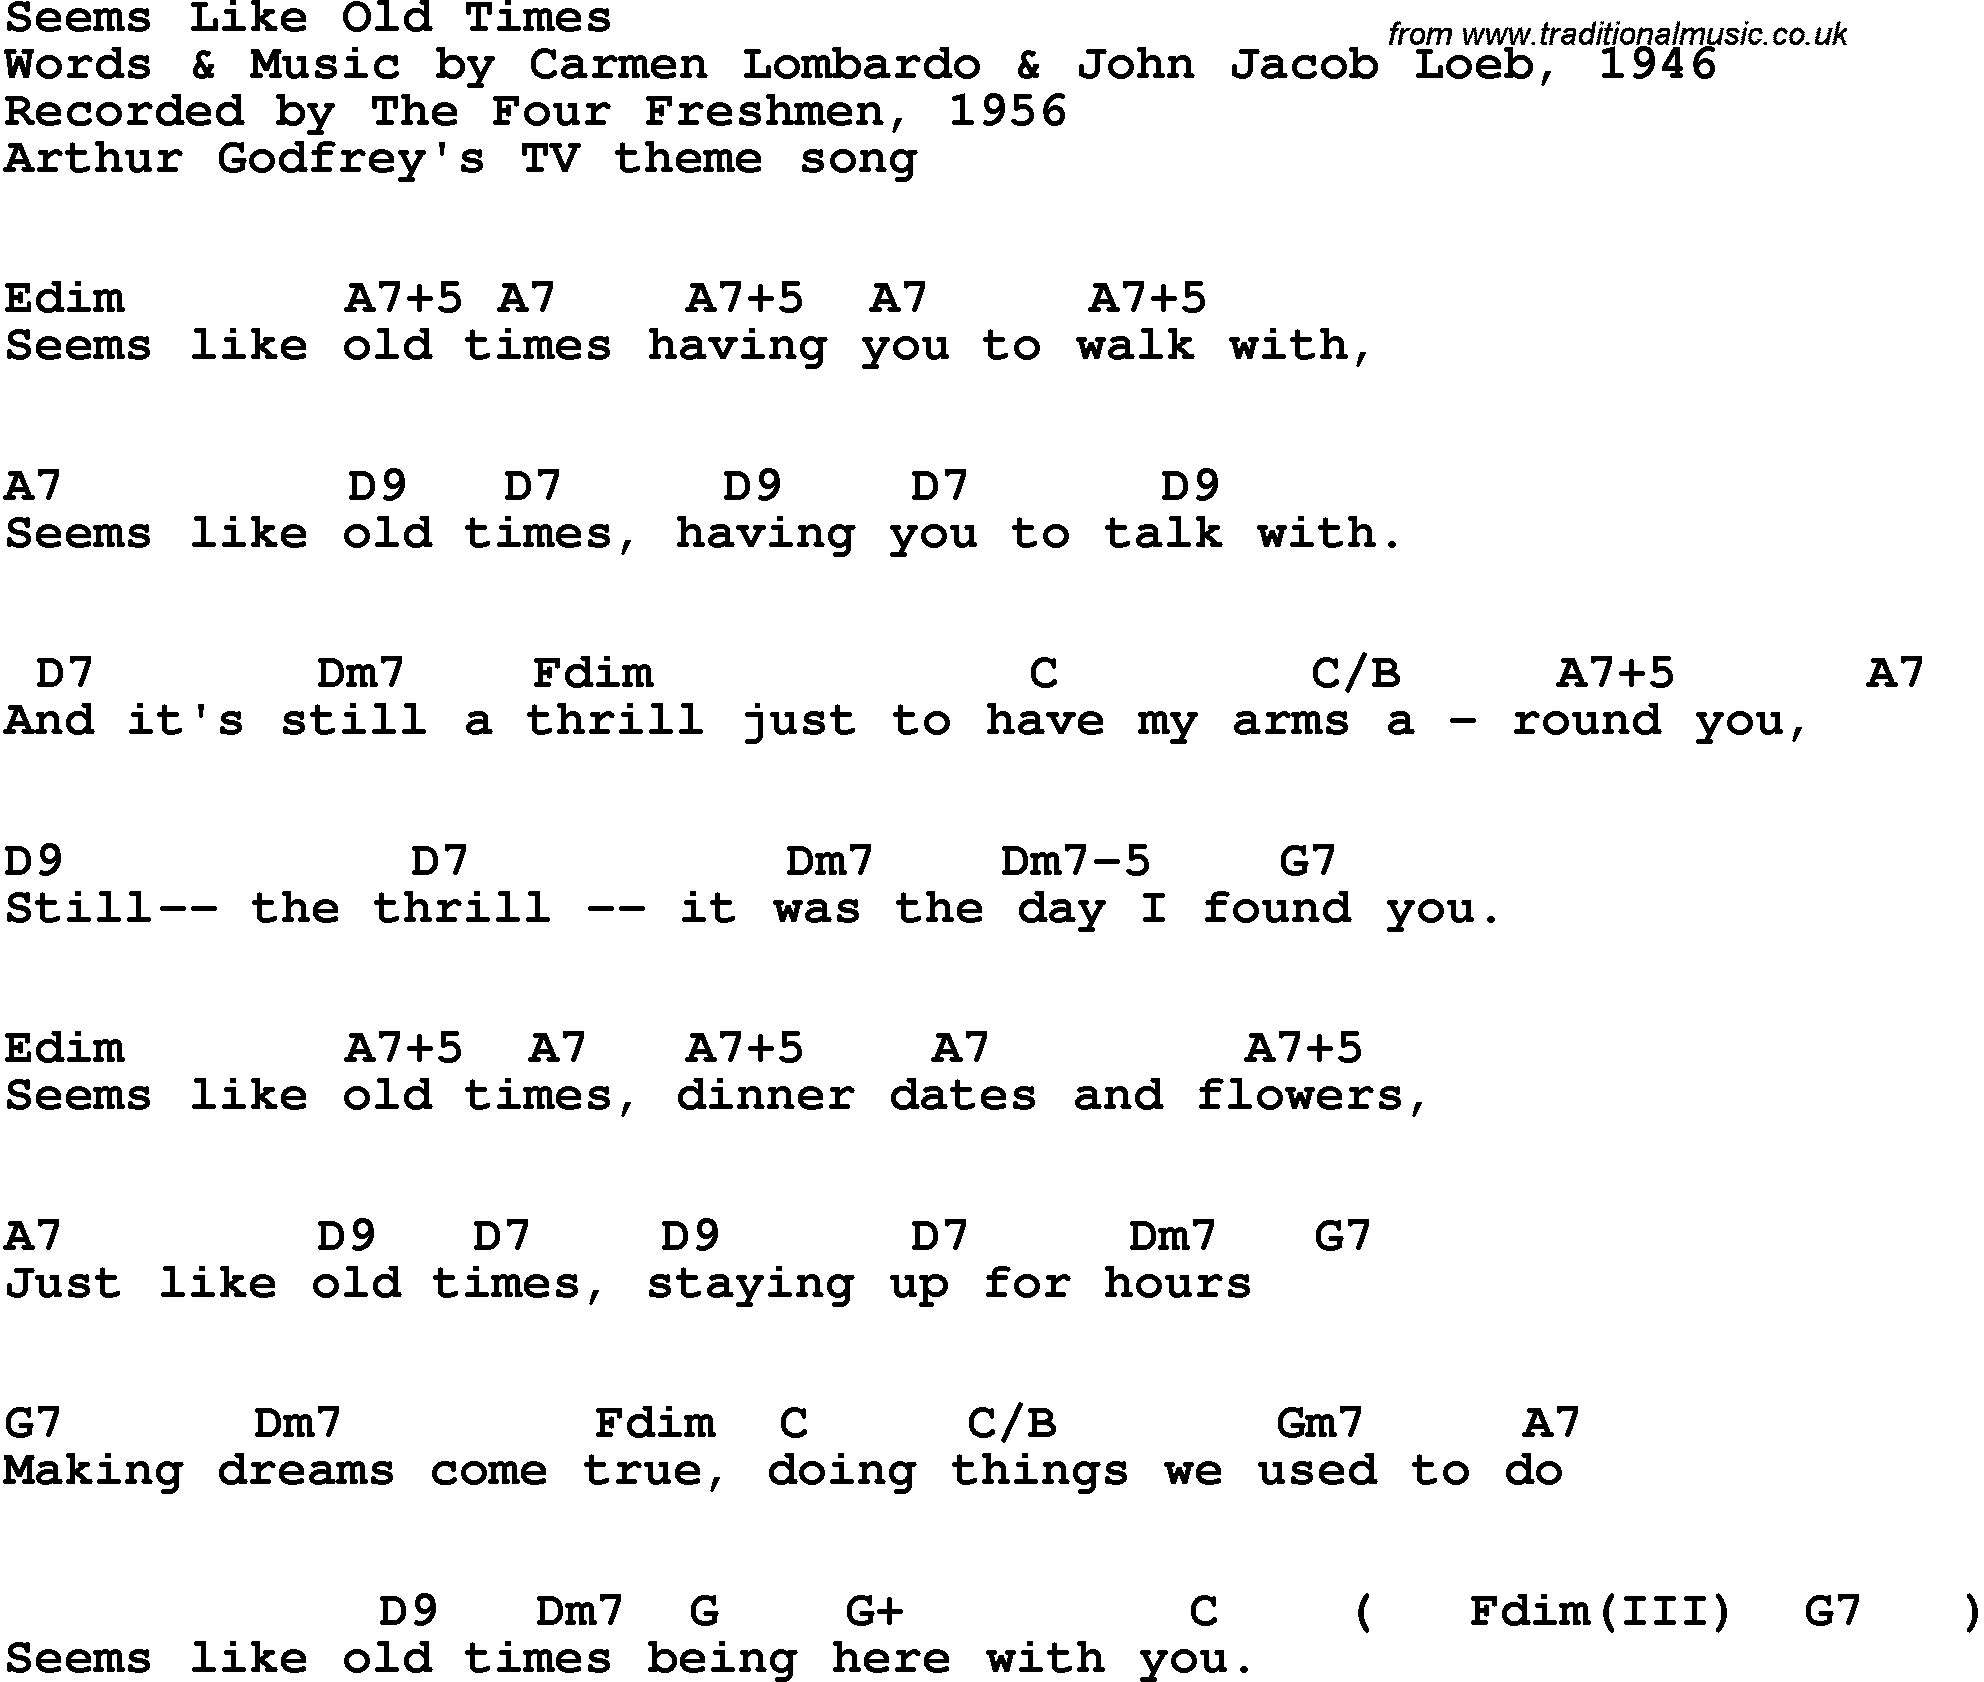 Song Lyrics with guitar chords for Seems Like Old Times - The Four Freshmen, 1956